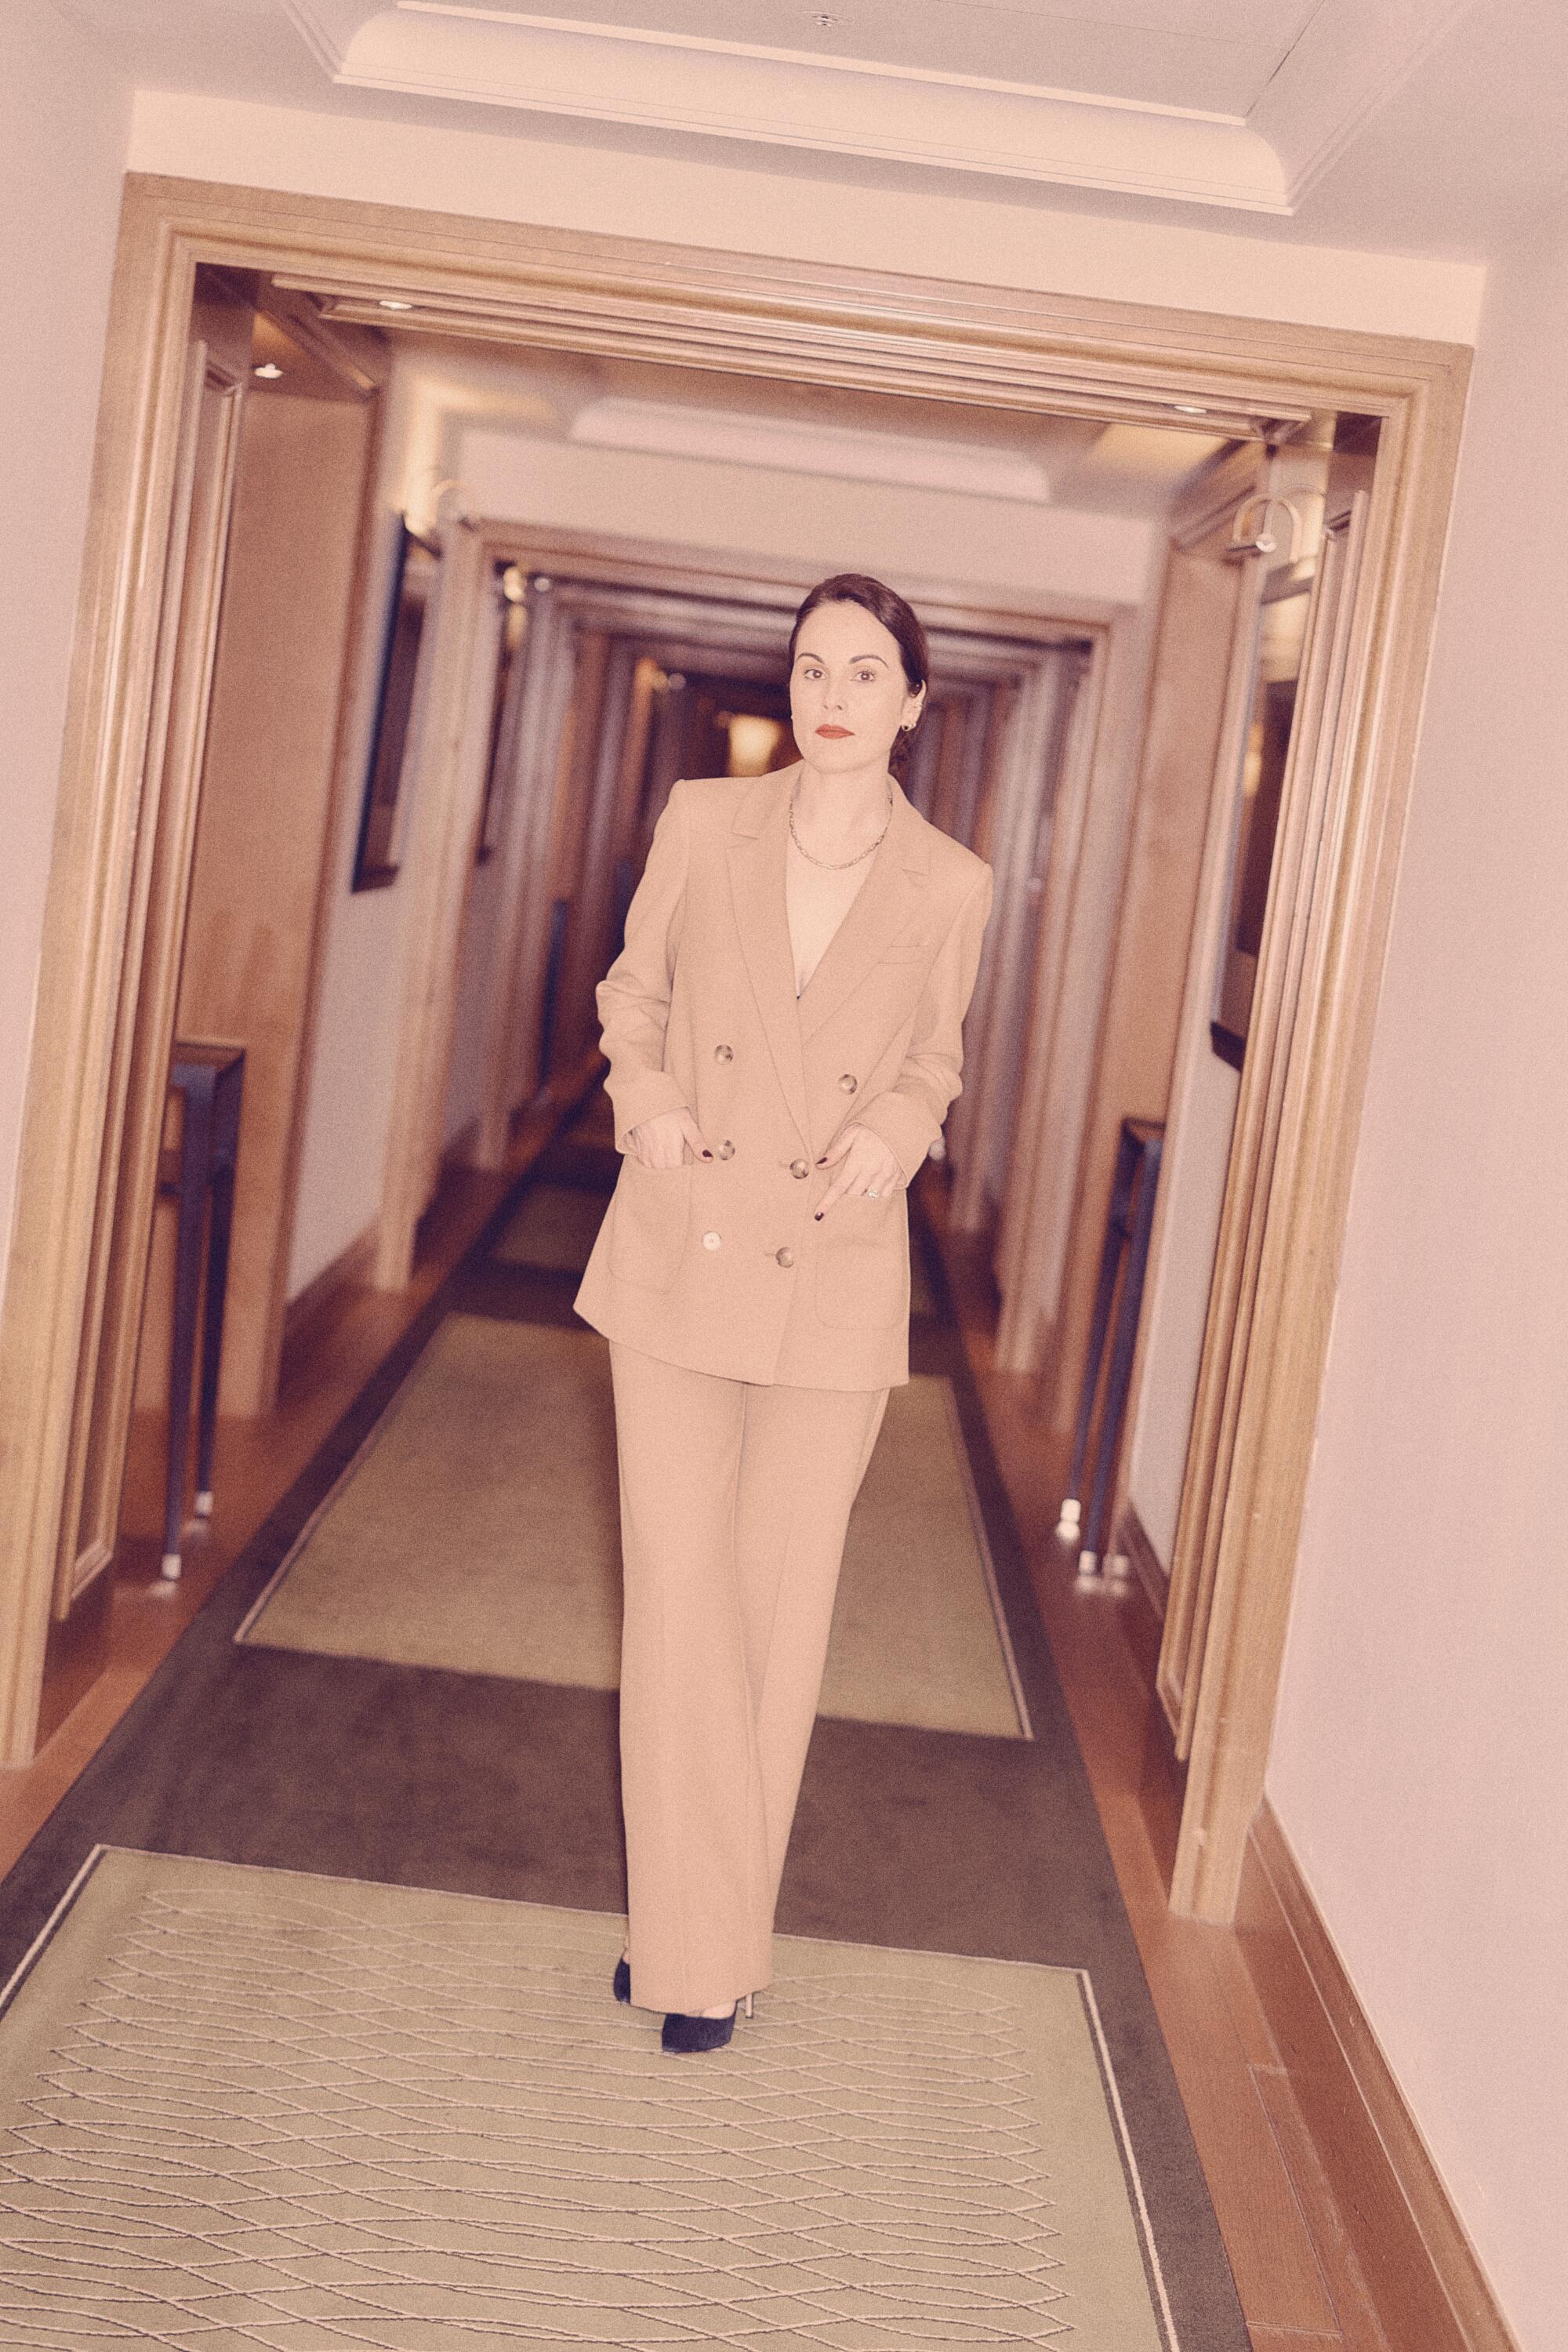 A woman in a suit poses in a hotel hallway.